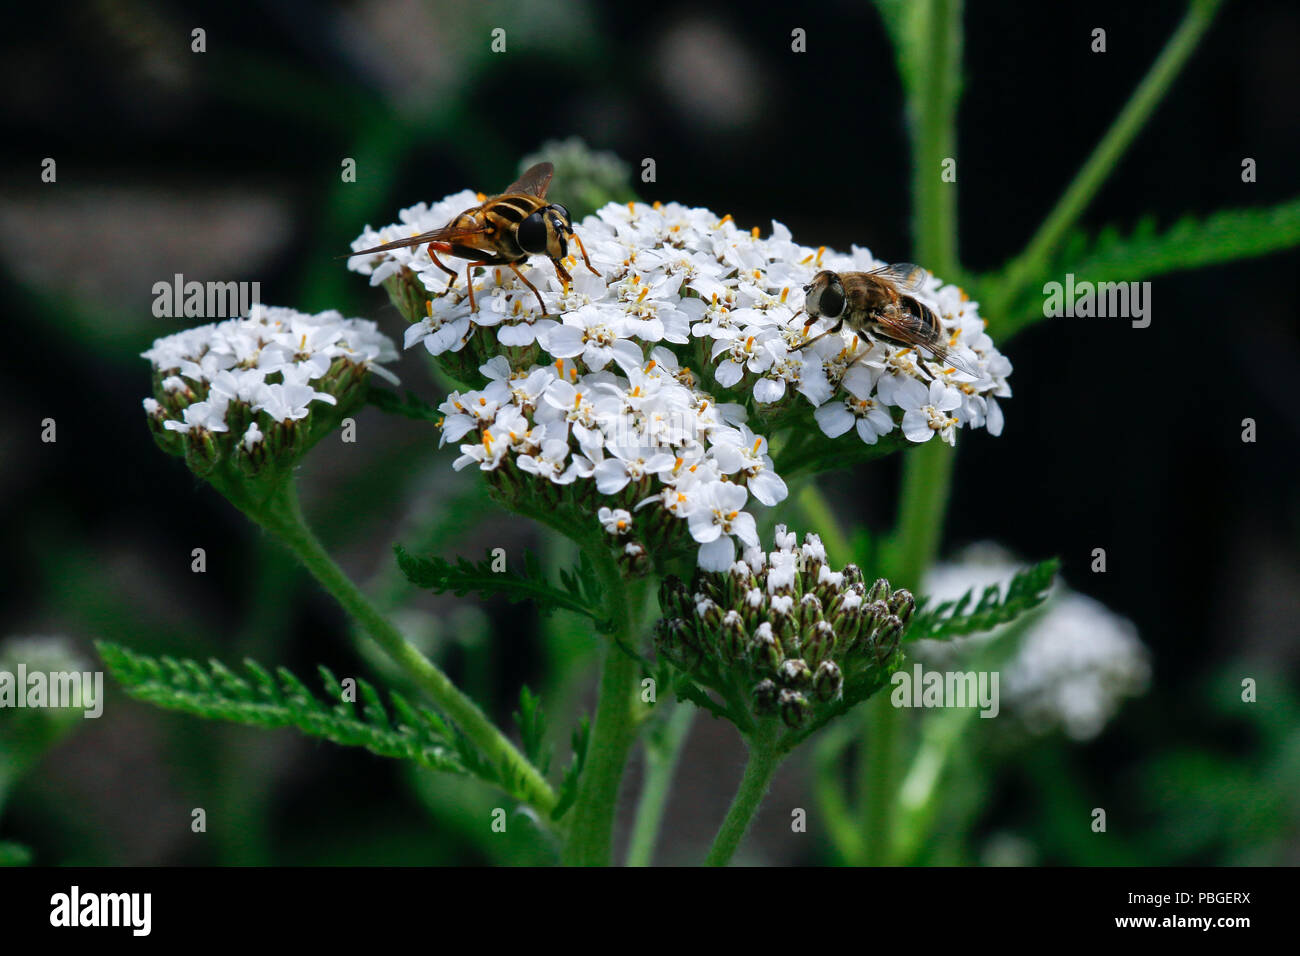 Insects feeding on flowers of Yarrow (Achillea Millefolium), a medicinal herb traditionally used for its anti-inflammatory properties Stock Photo